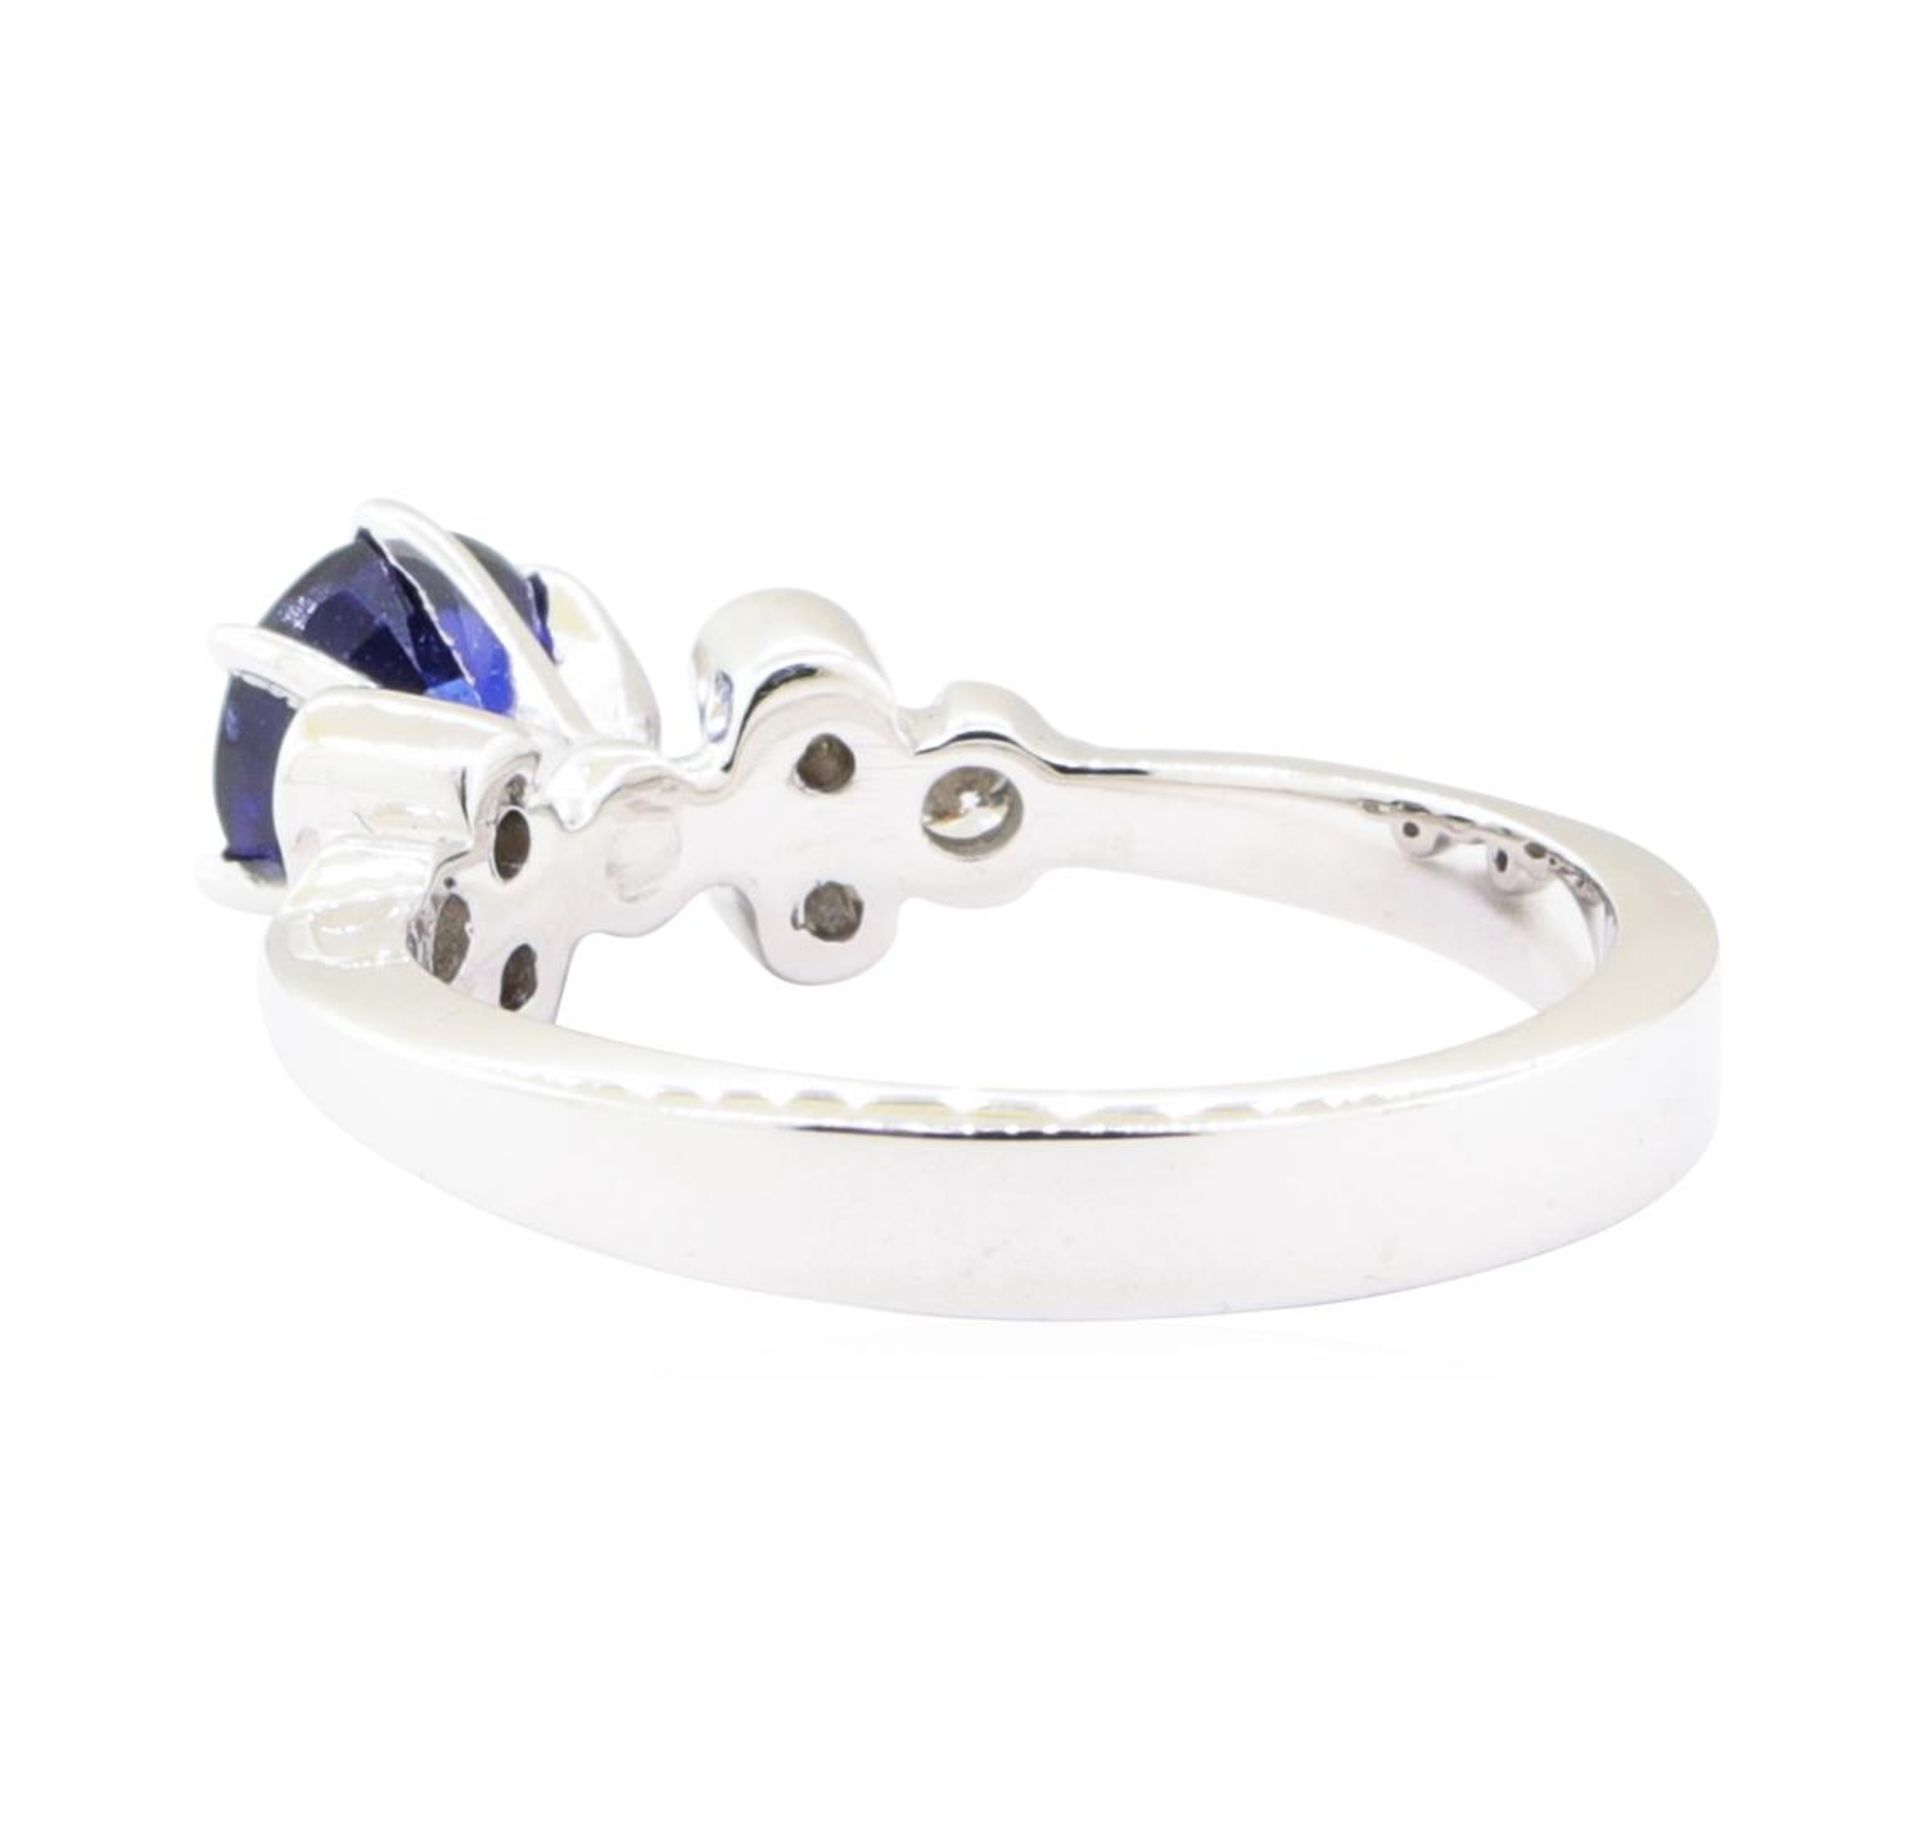 1.44ctw Sapphire and Diamond Ring - 18KT White Gold - Image 3 of 4